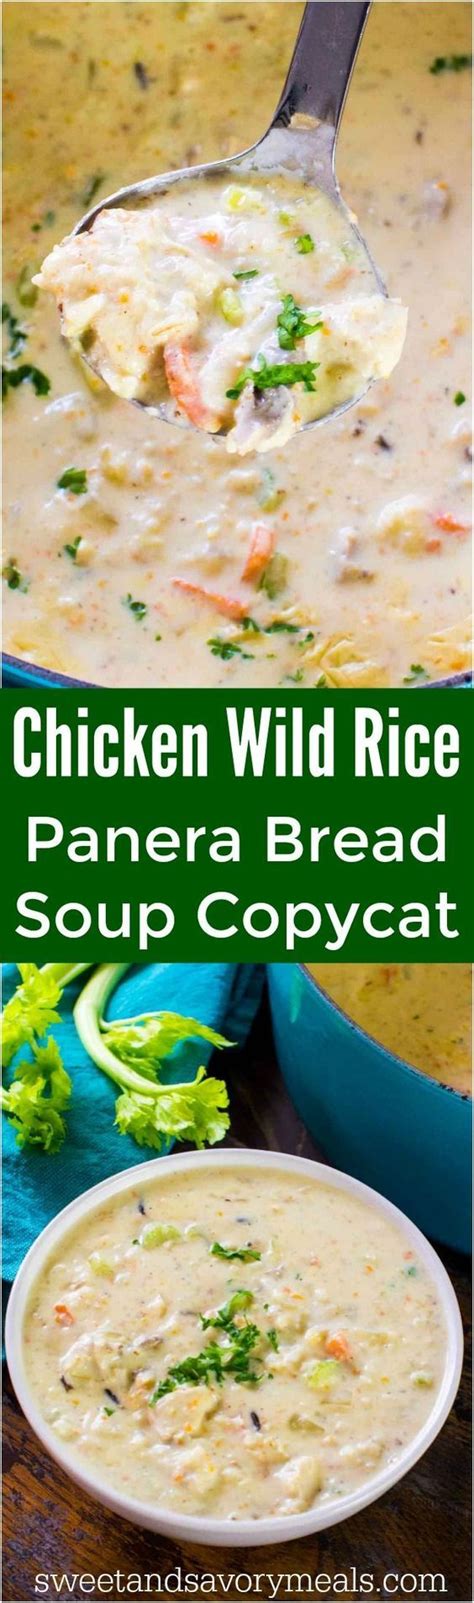 Let me know if you try. Panera Bread Chicken Wild Rice Soup Copycat [VIDEO ...